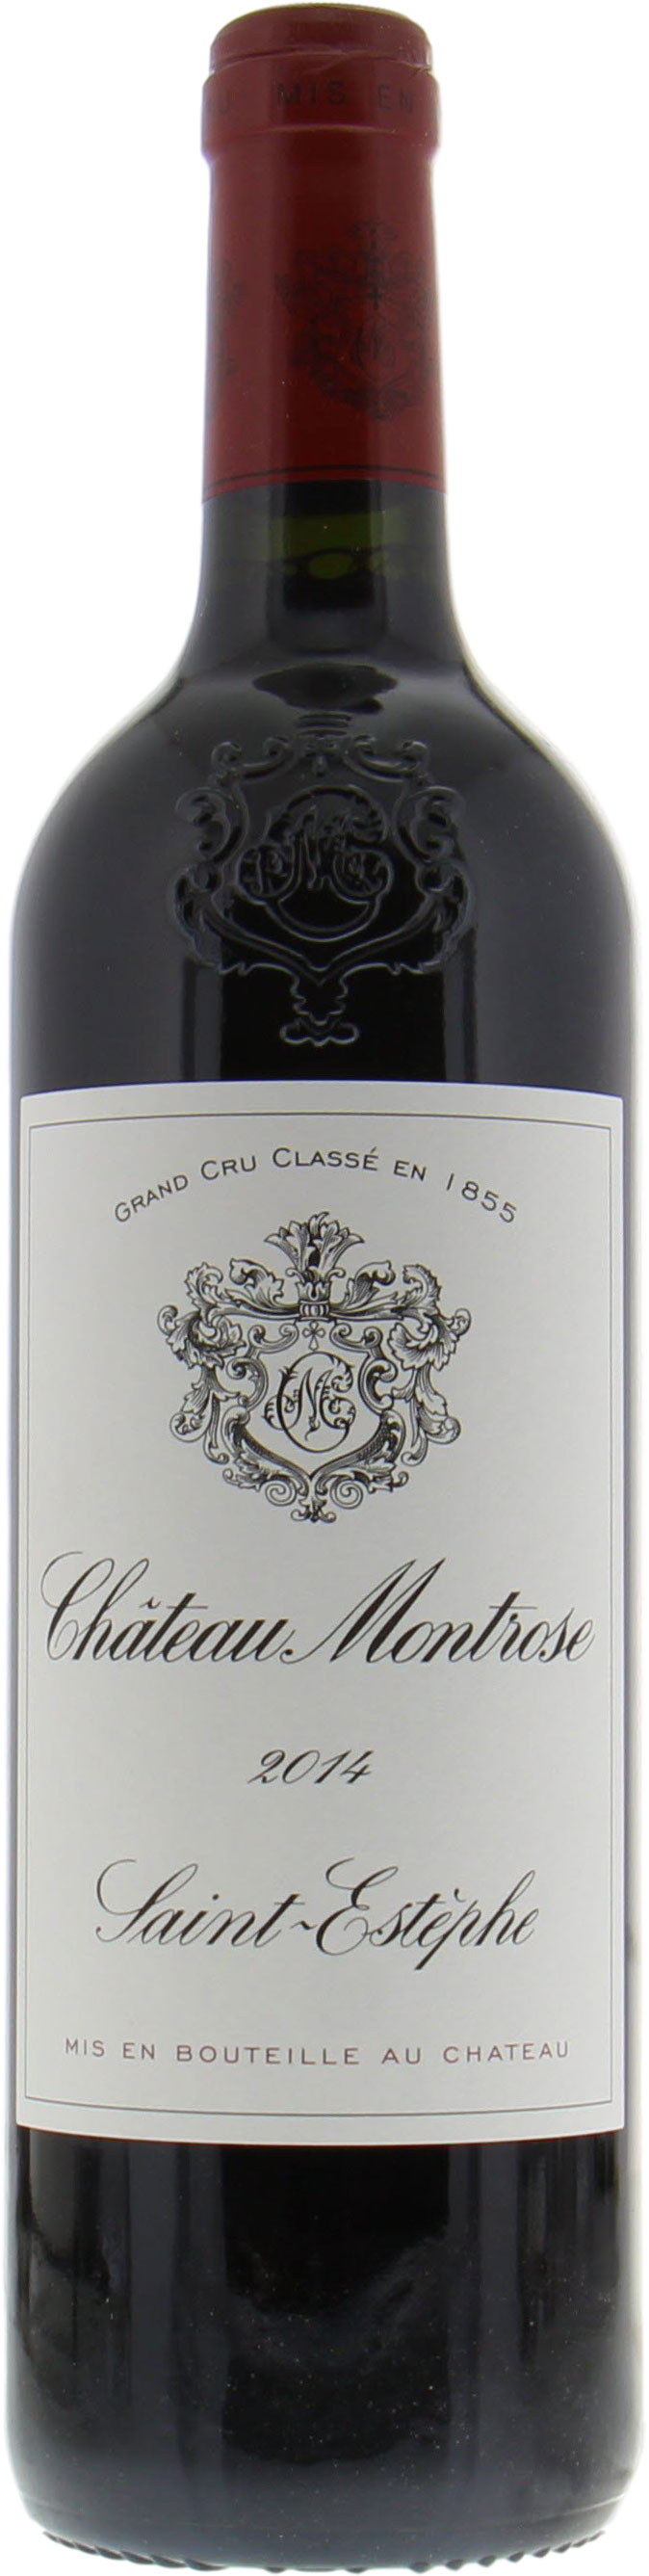 | of Best Montrose 2014 Wines Buy Online | Chateau